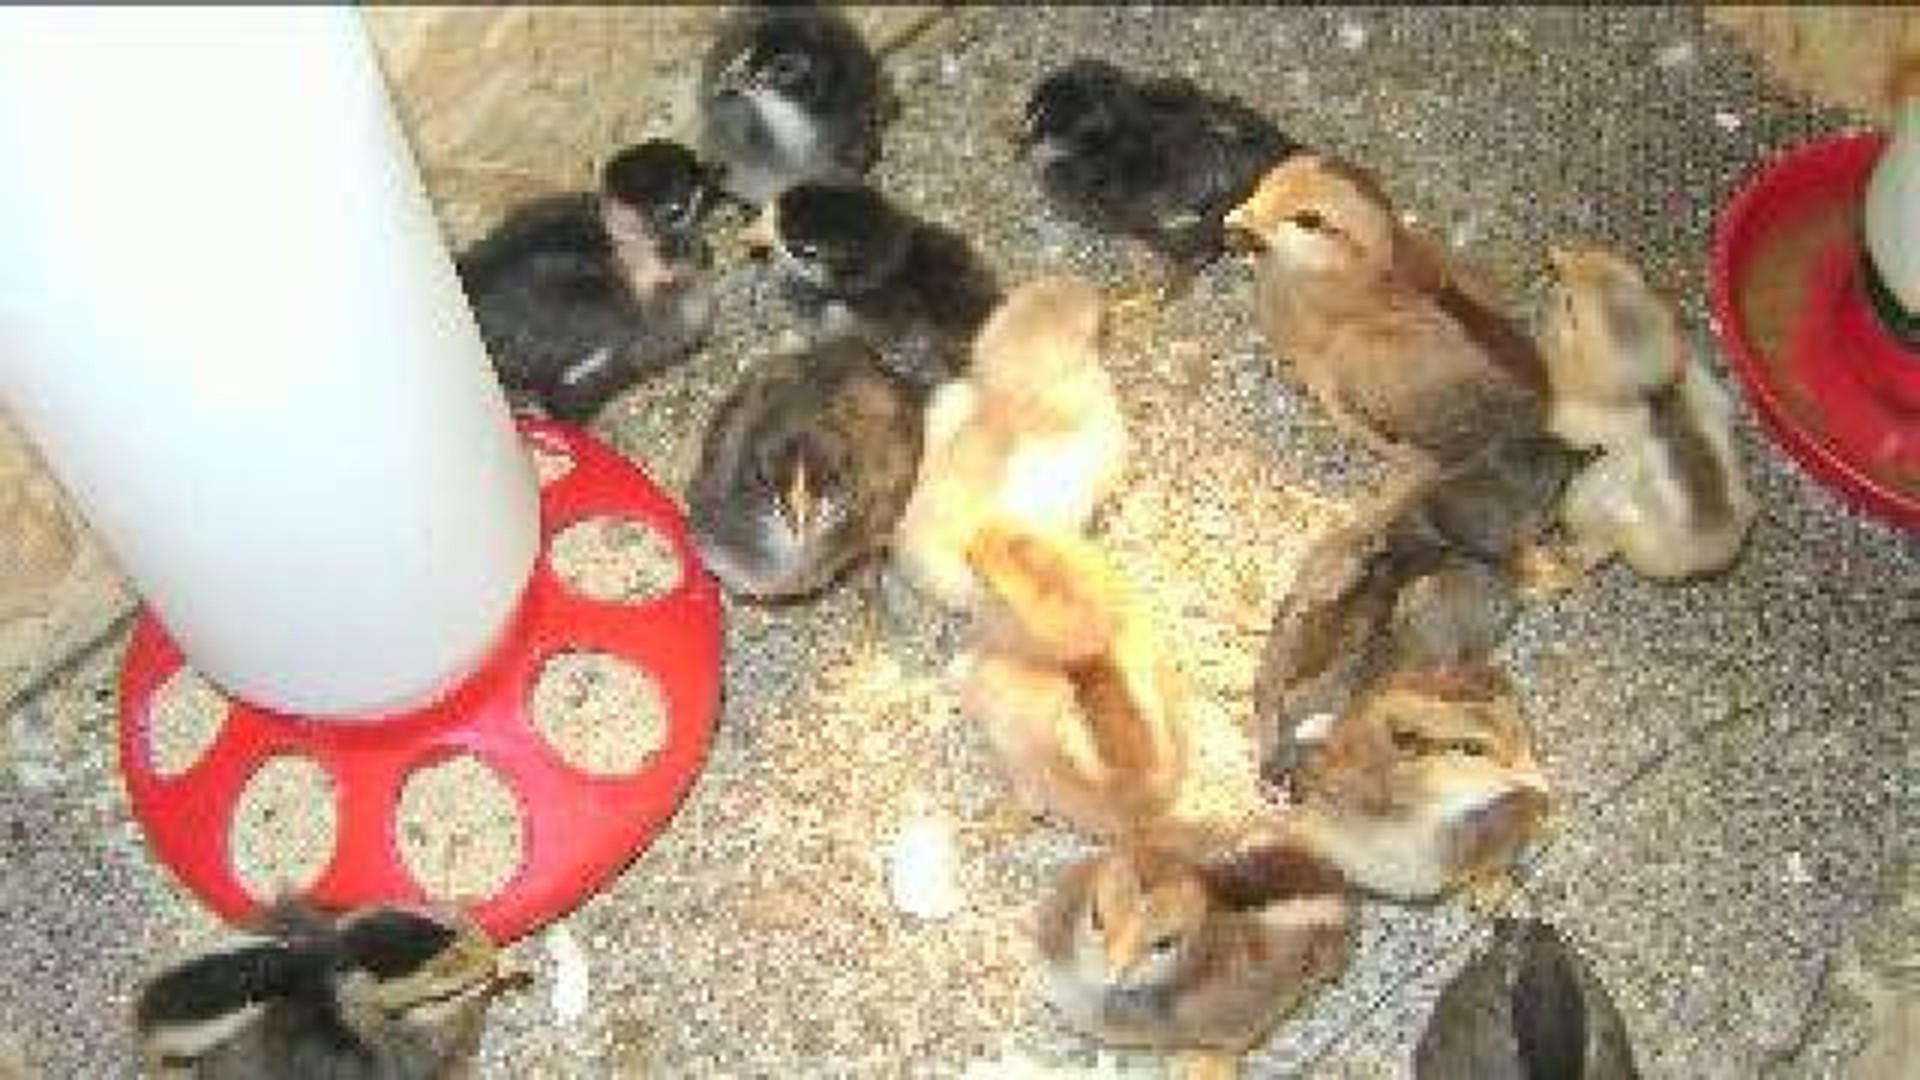 Roughly 100 Chickens Found in a Basement